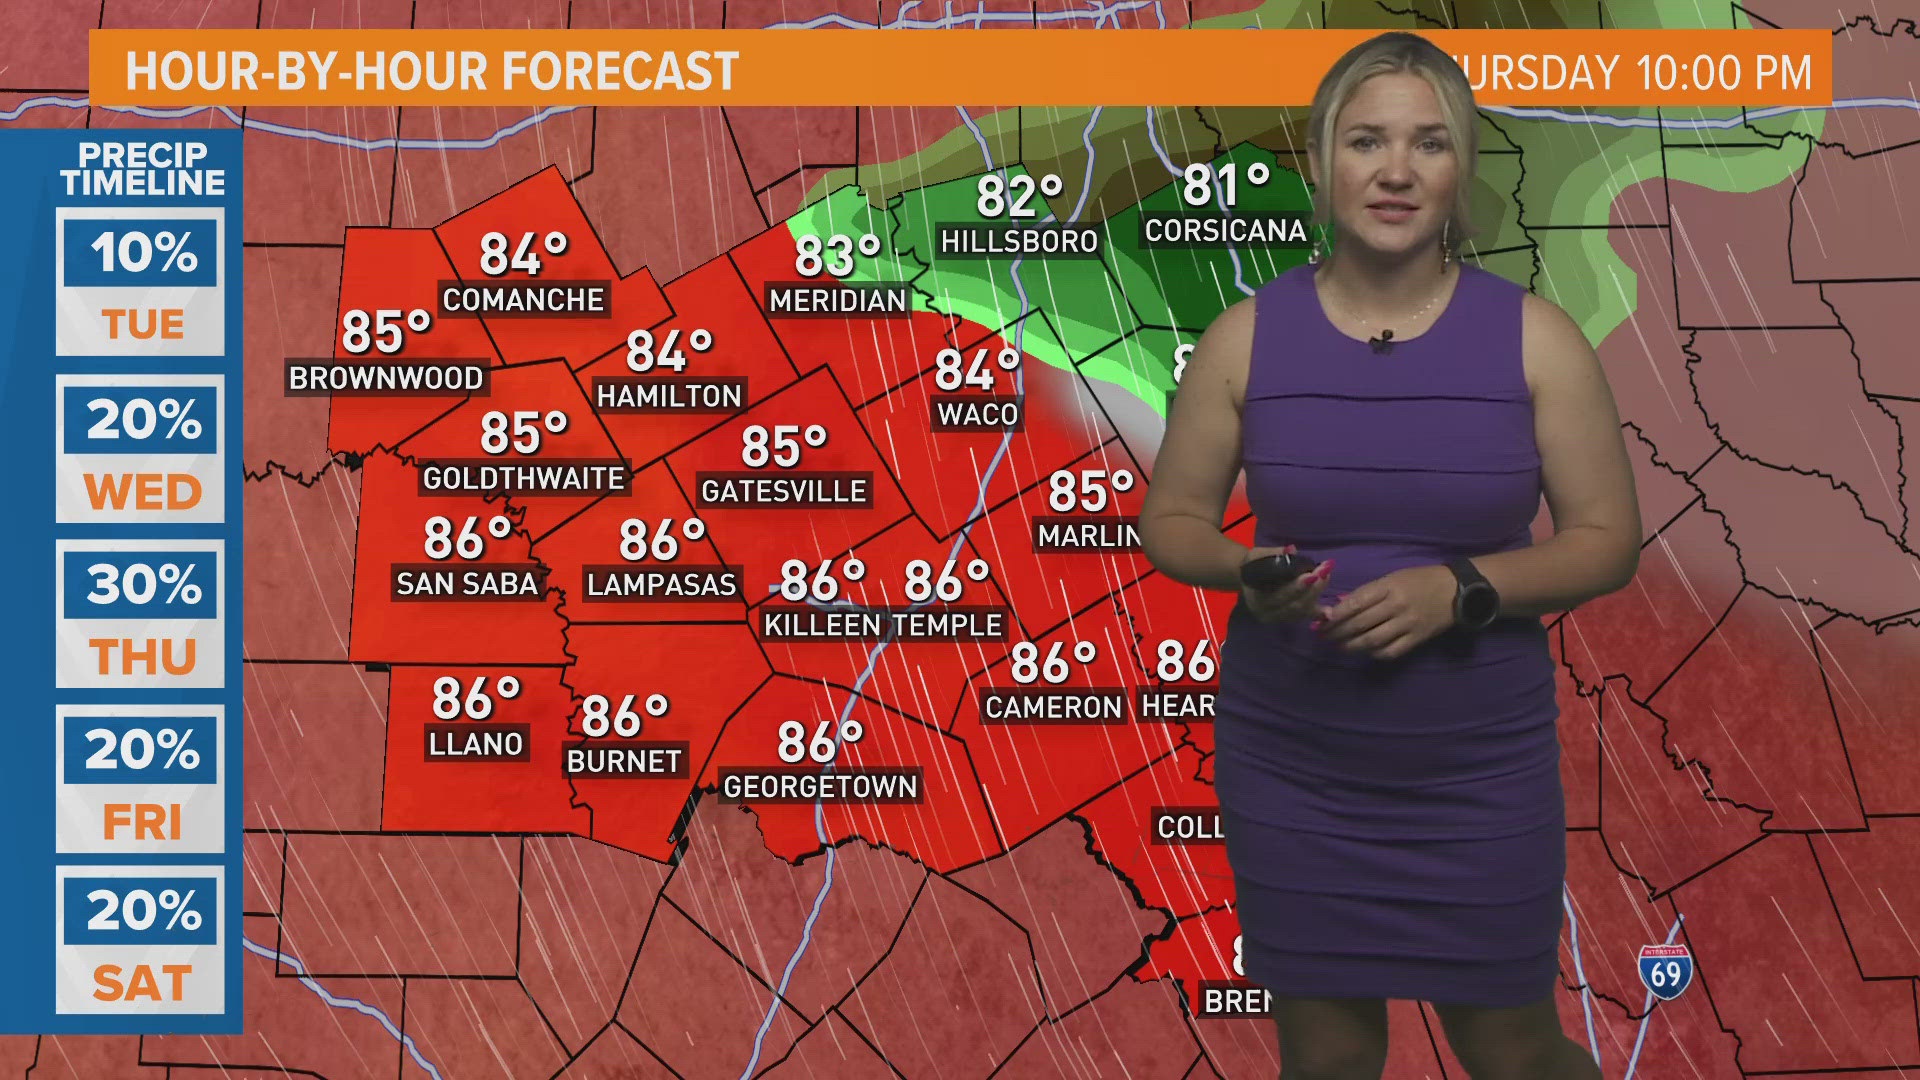 Get ready for several days with highs in the 90s and Heat Index Values approaching 100